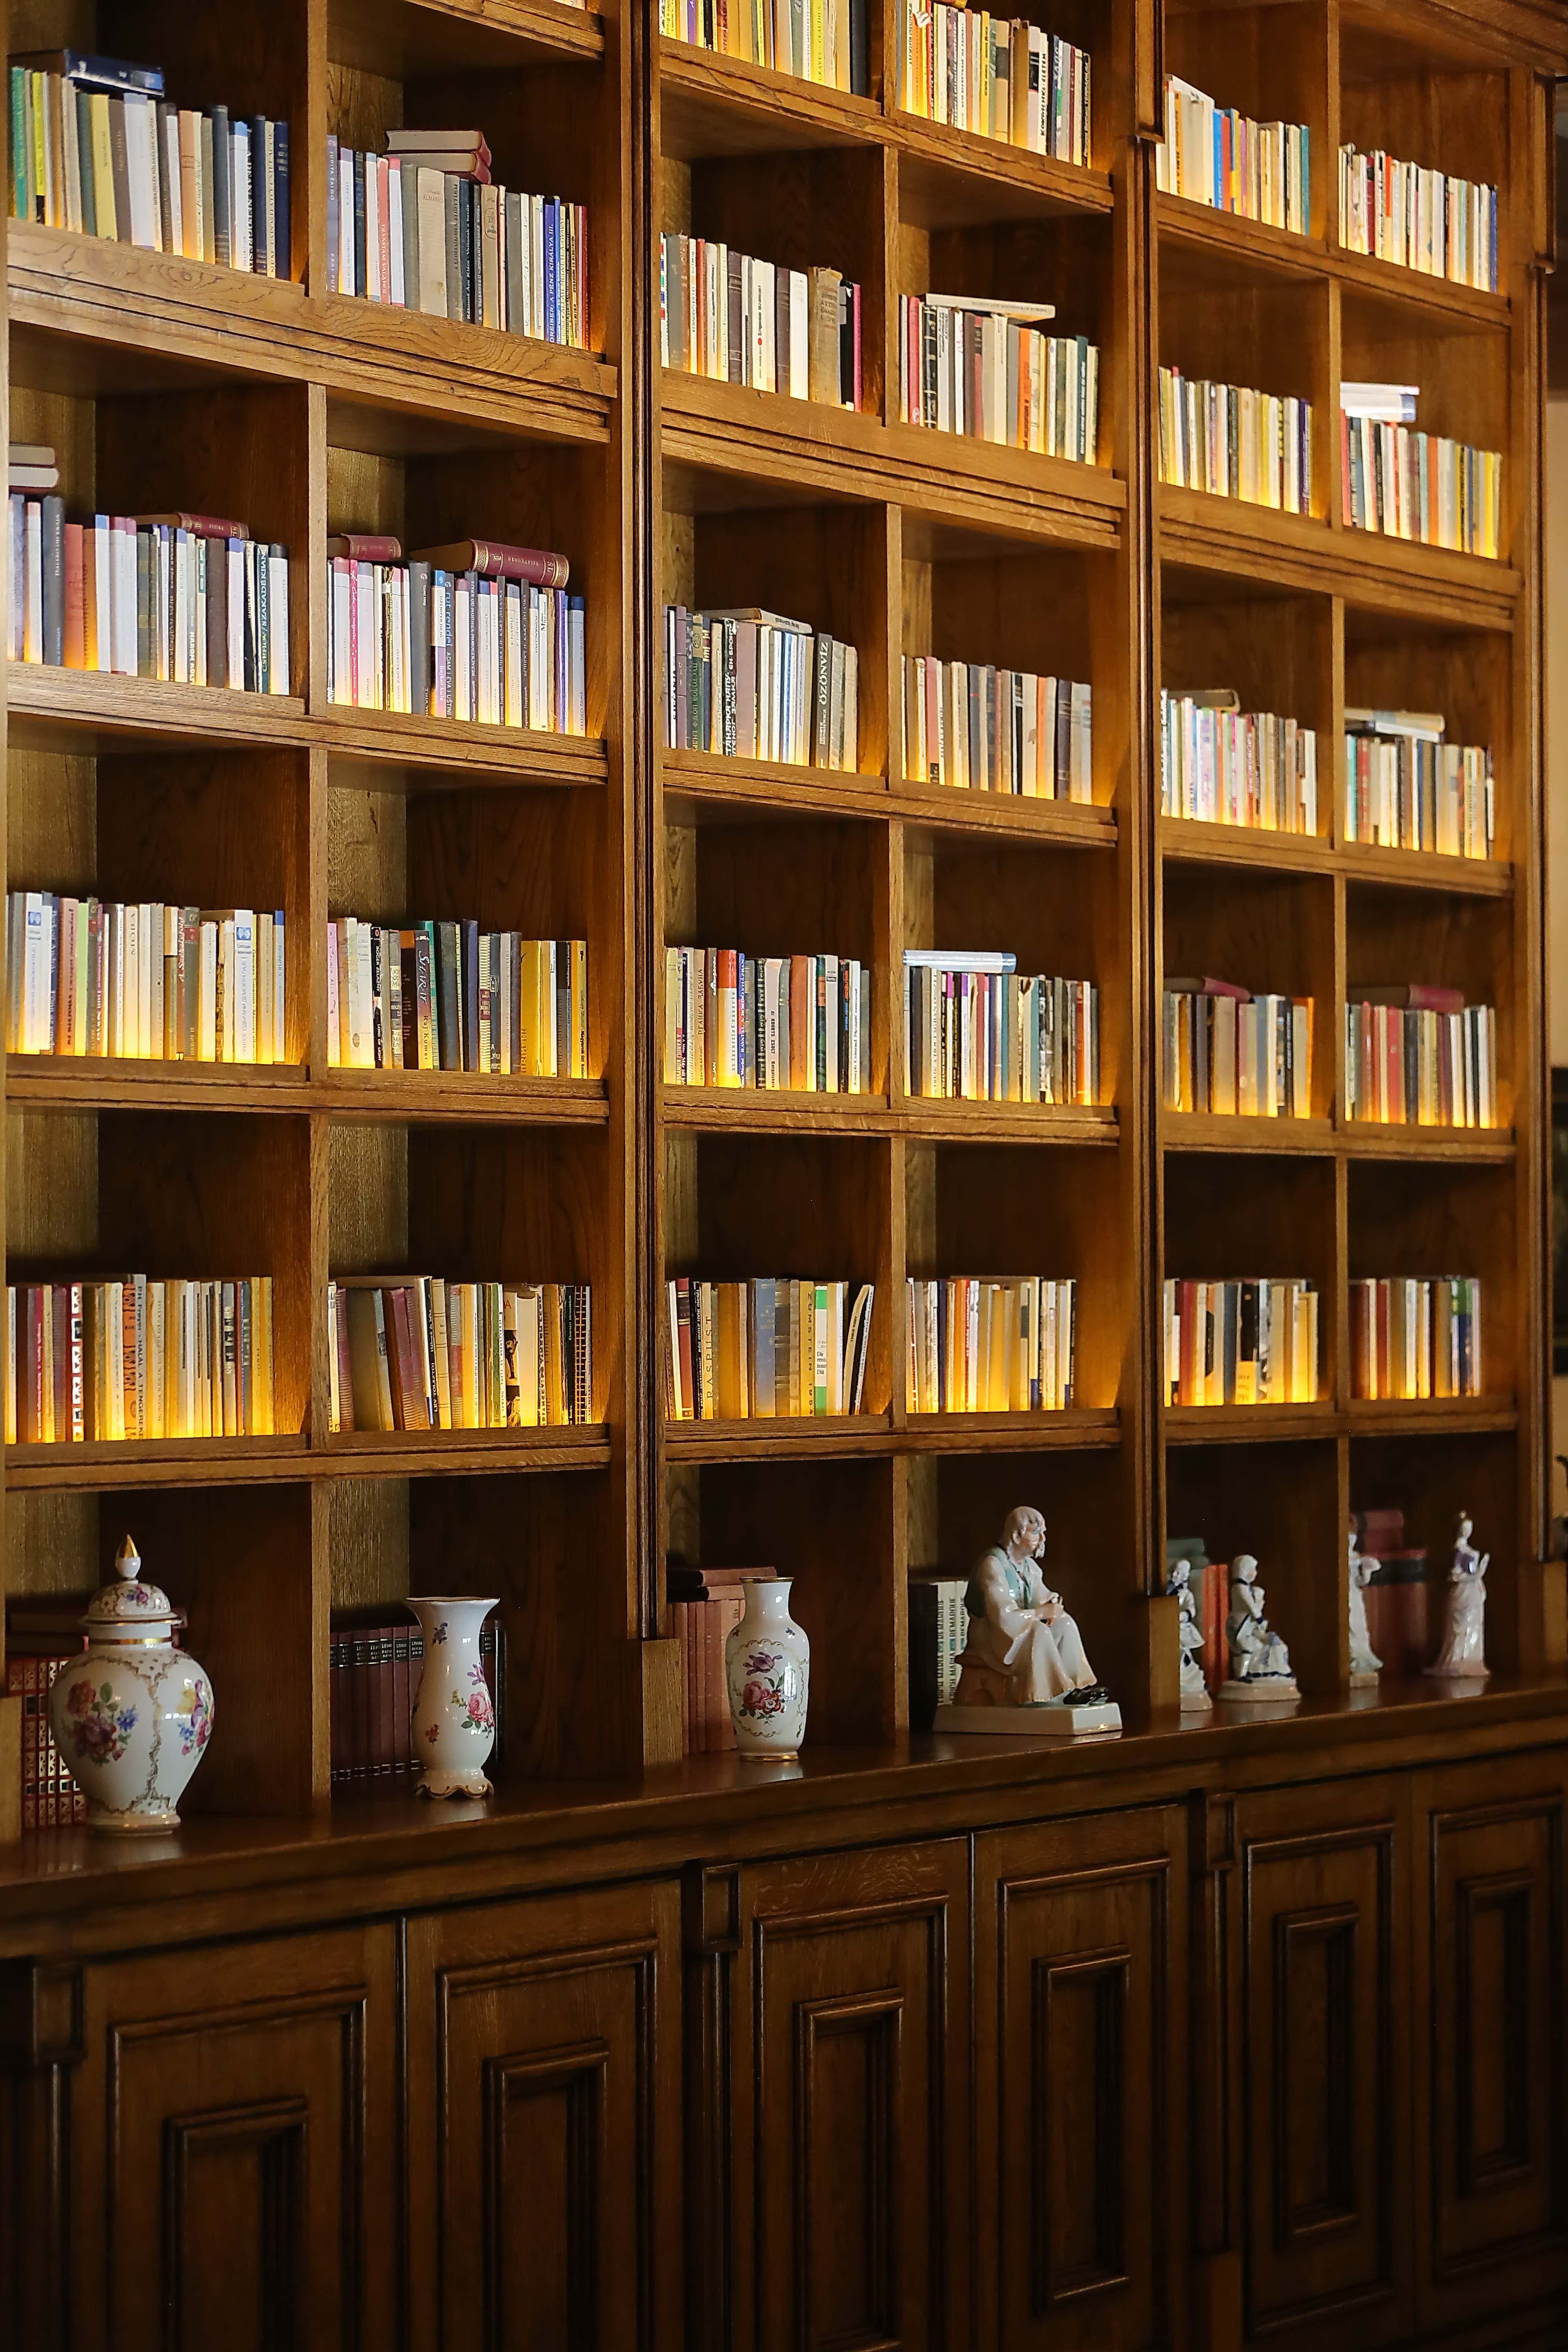 Curating an Exquisite Collection of Books to Adorn Your Opulent Library